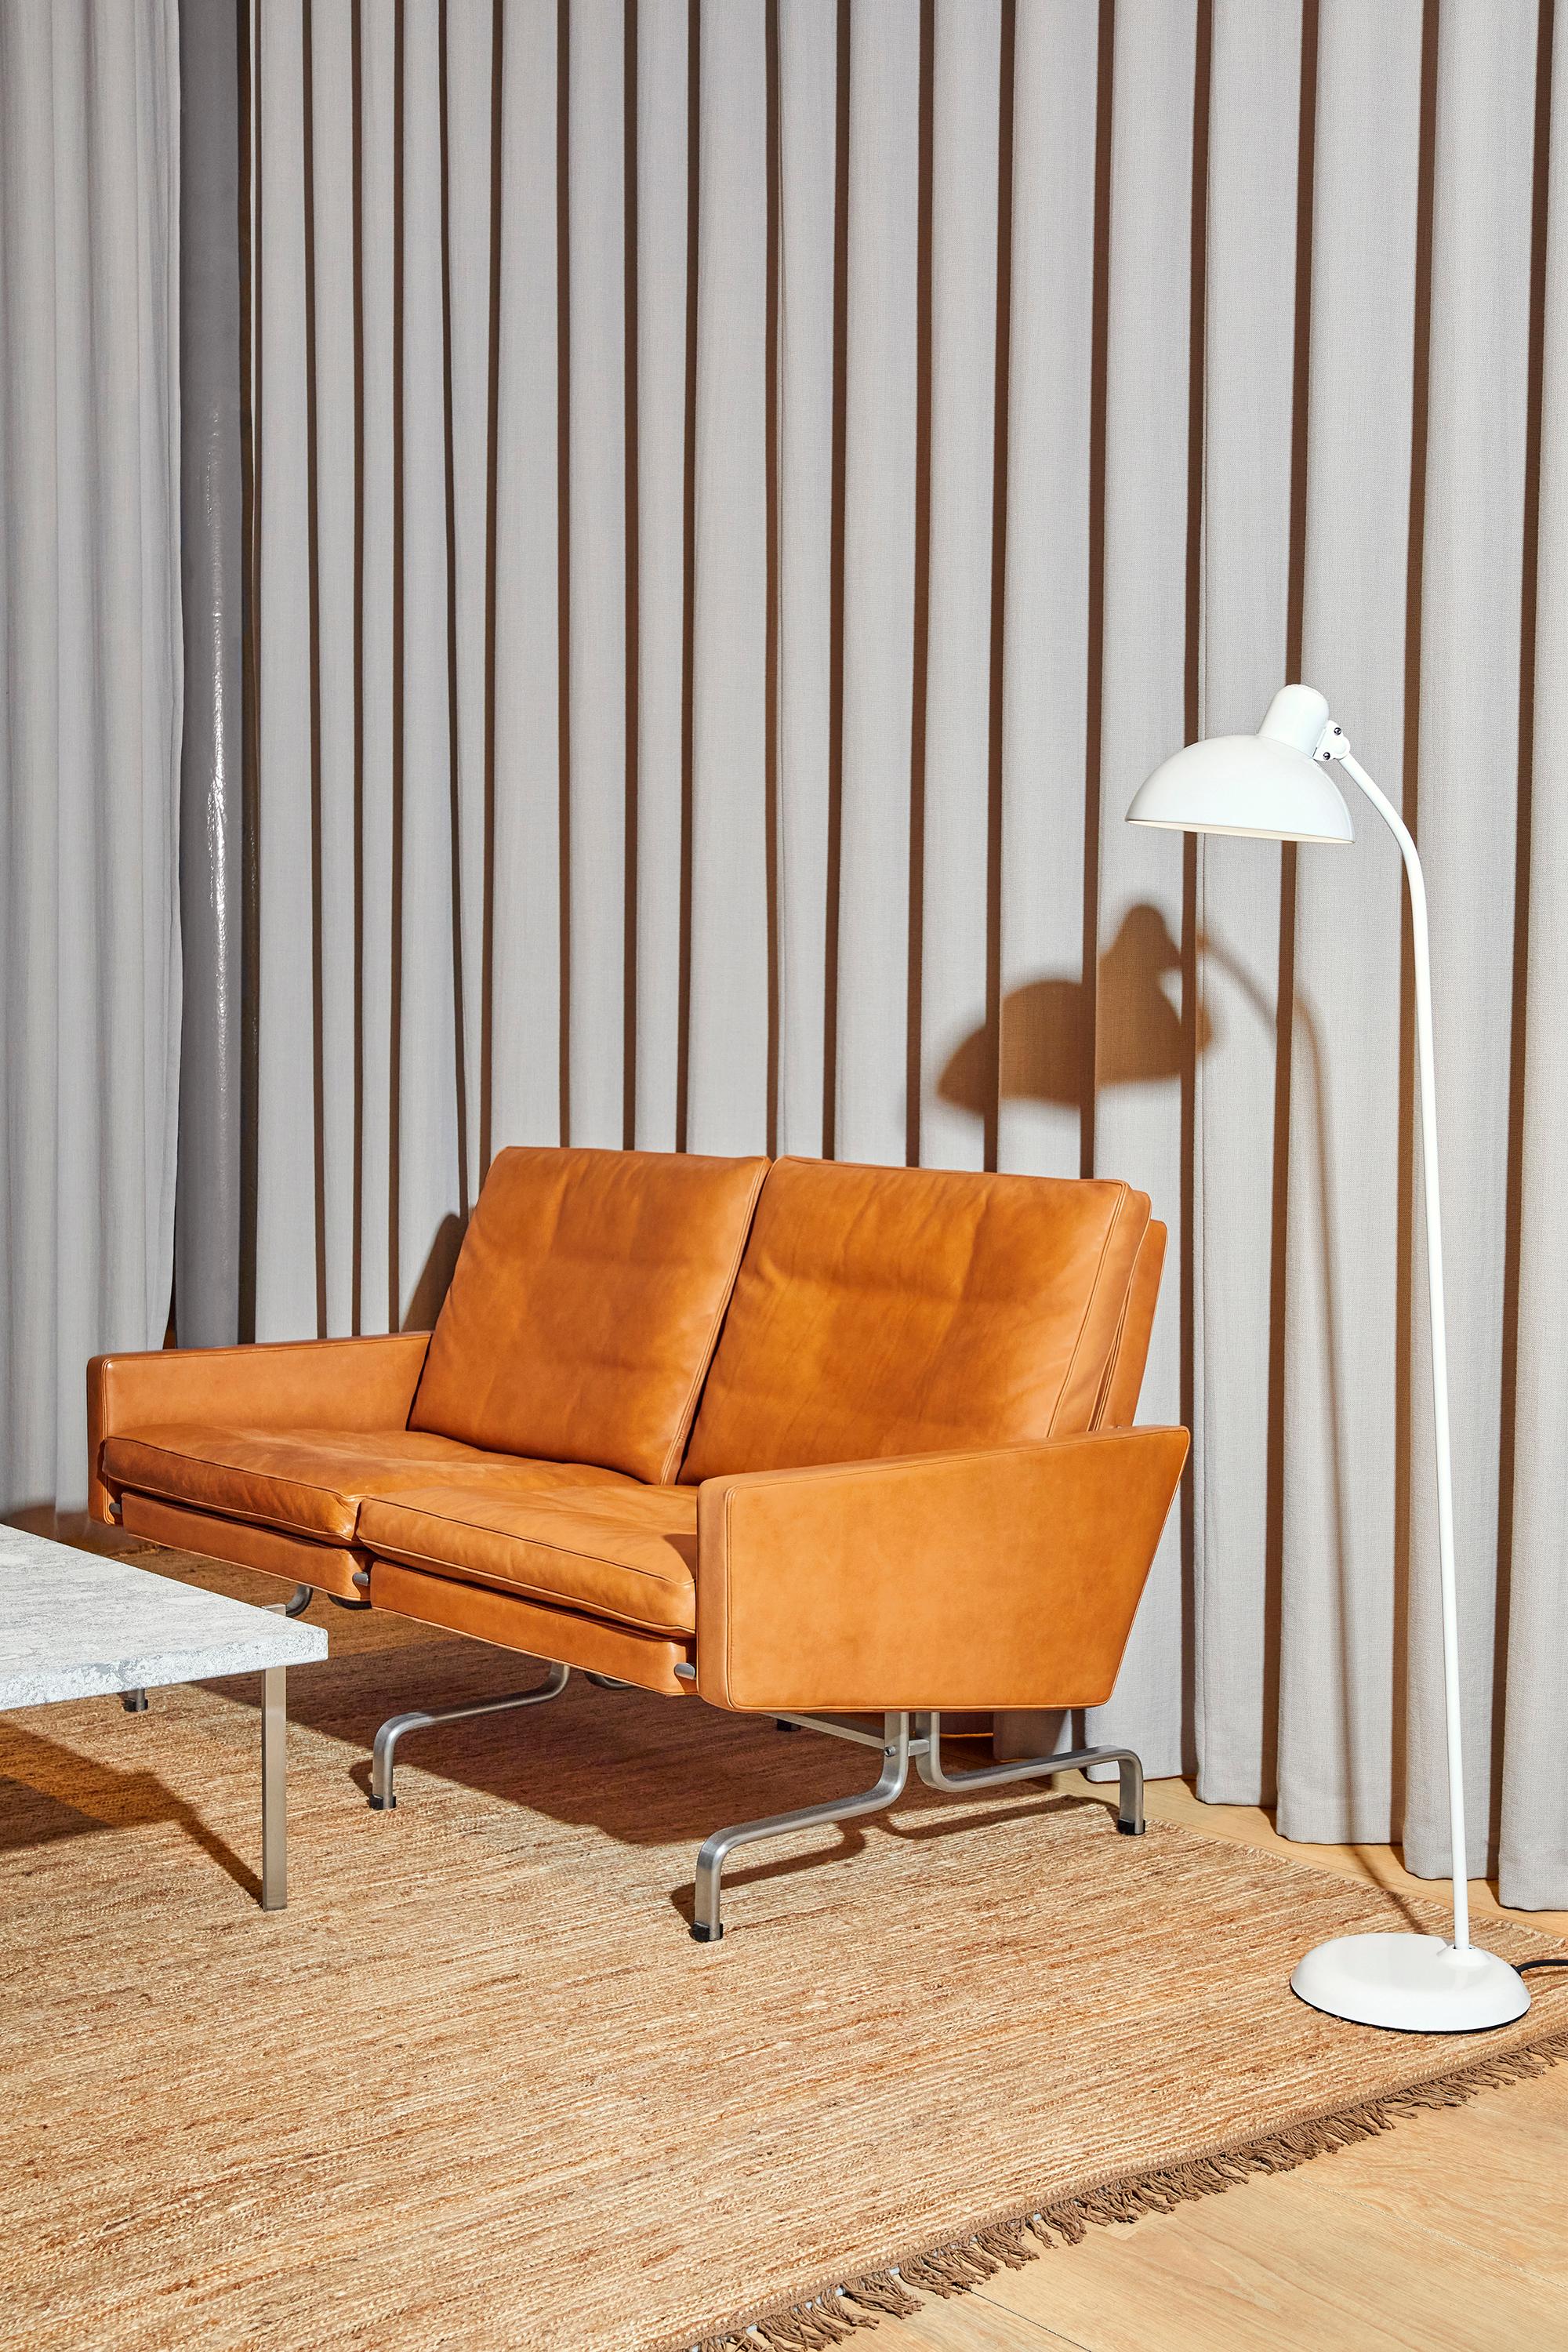 Poul Kjærholm 'PK31' 2-Seater Sofa for Fritz Hansen in Leather (Cat. 5)

Established in 1872, Fritz Hansen has become synonymous with legendary Danish design. Combining timeless craftsmanship with an emphasis on sustainability, the brand’s